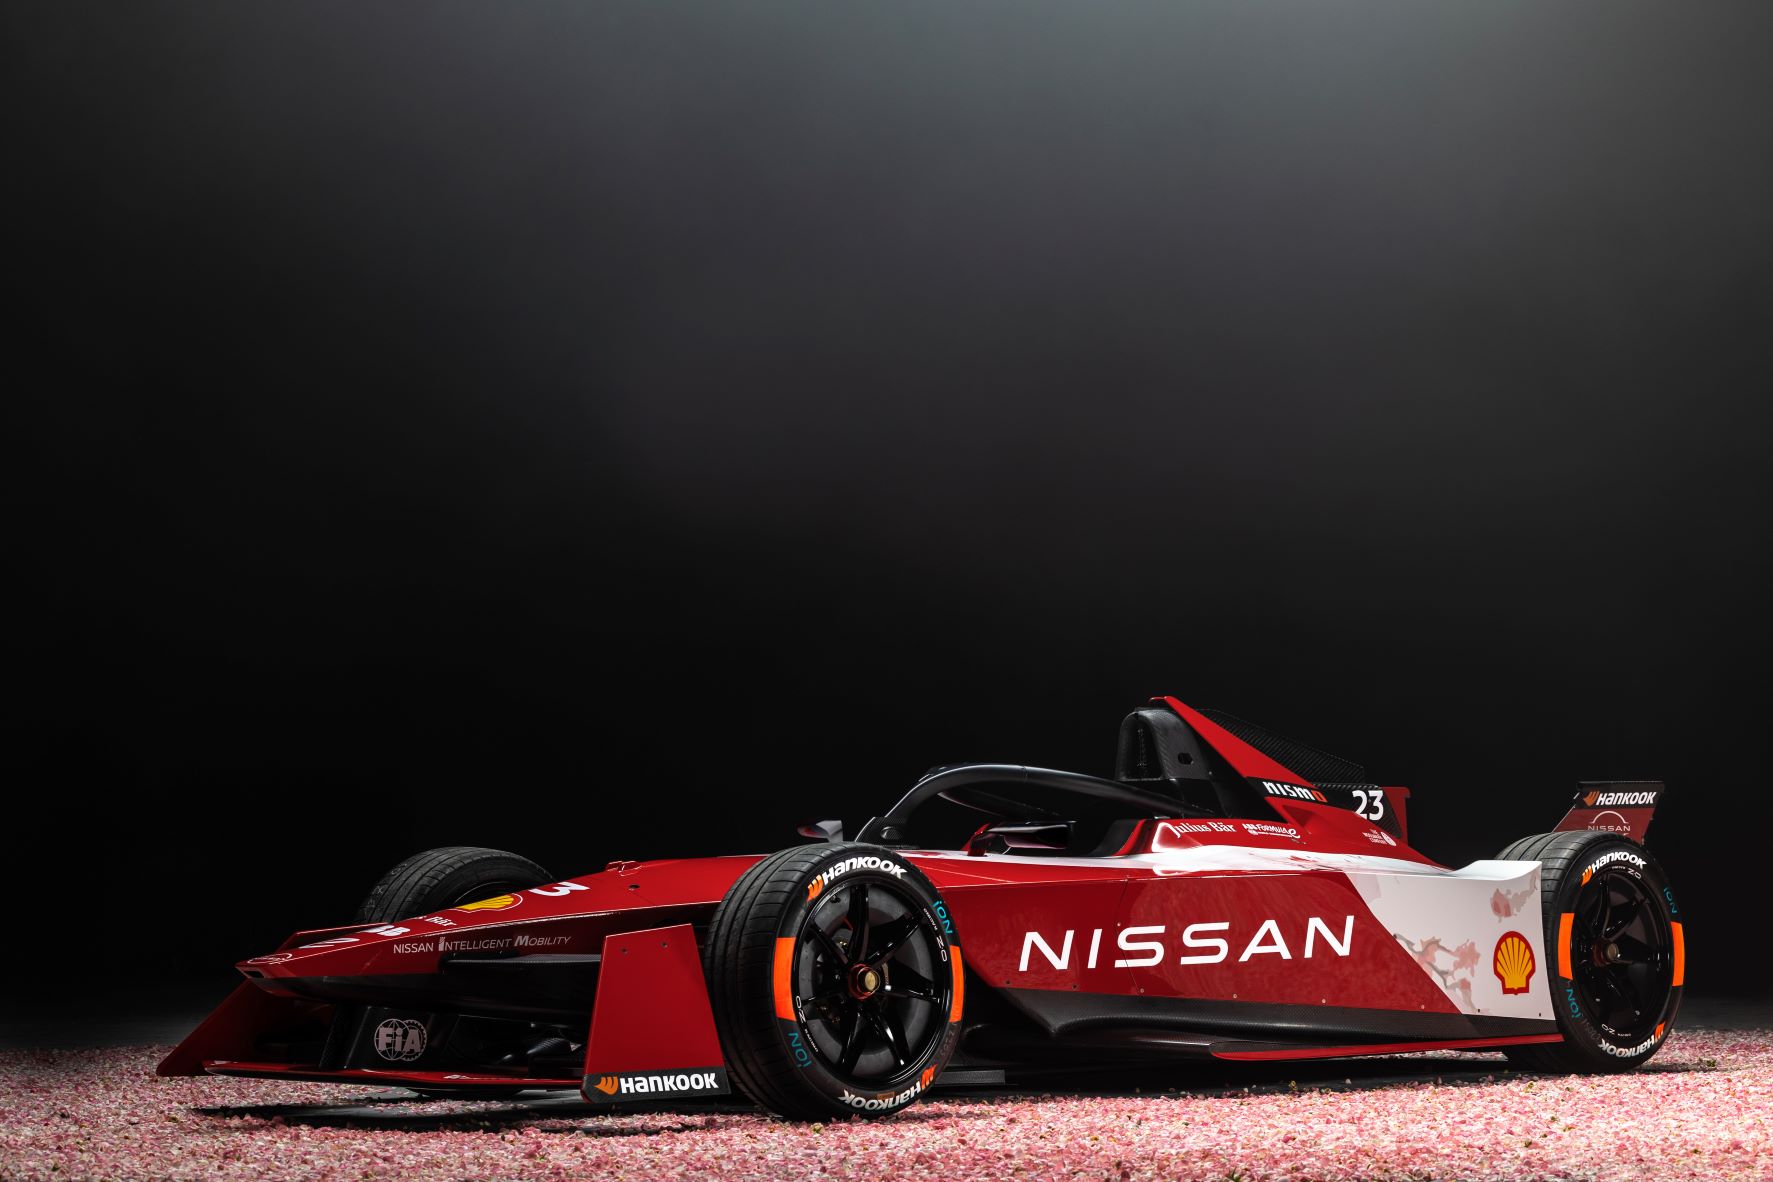 Front three quarters view of the Team Nissan Formula E race car in red and white.